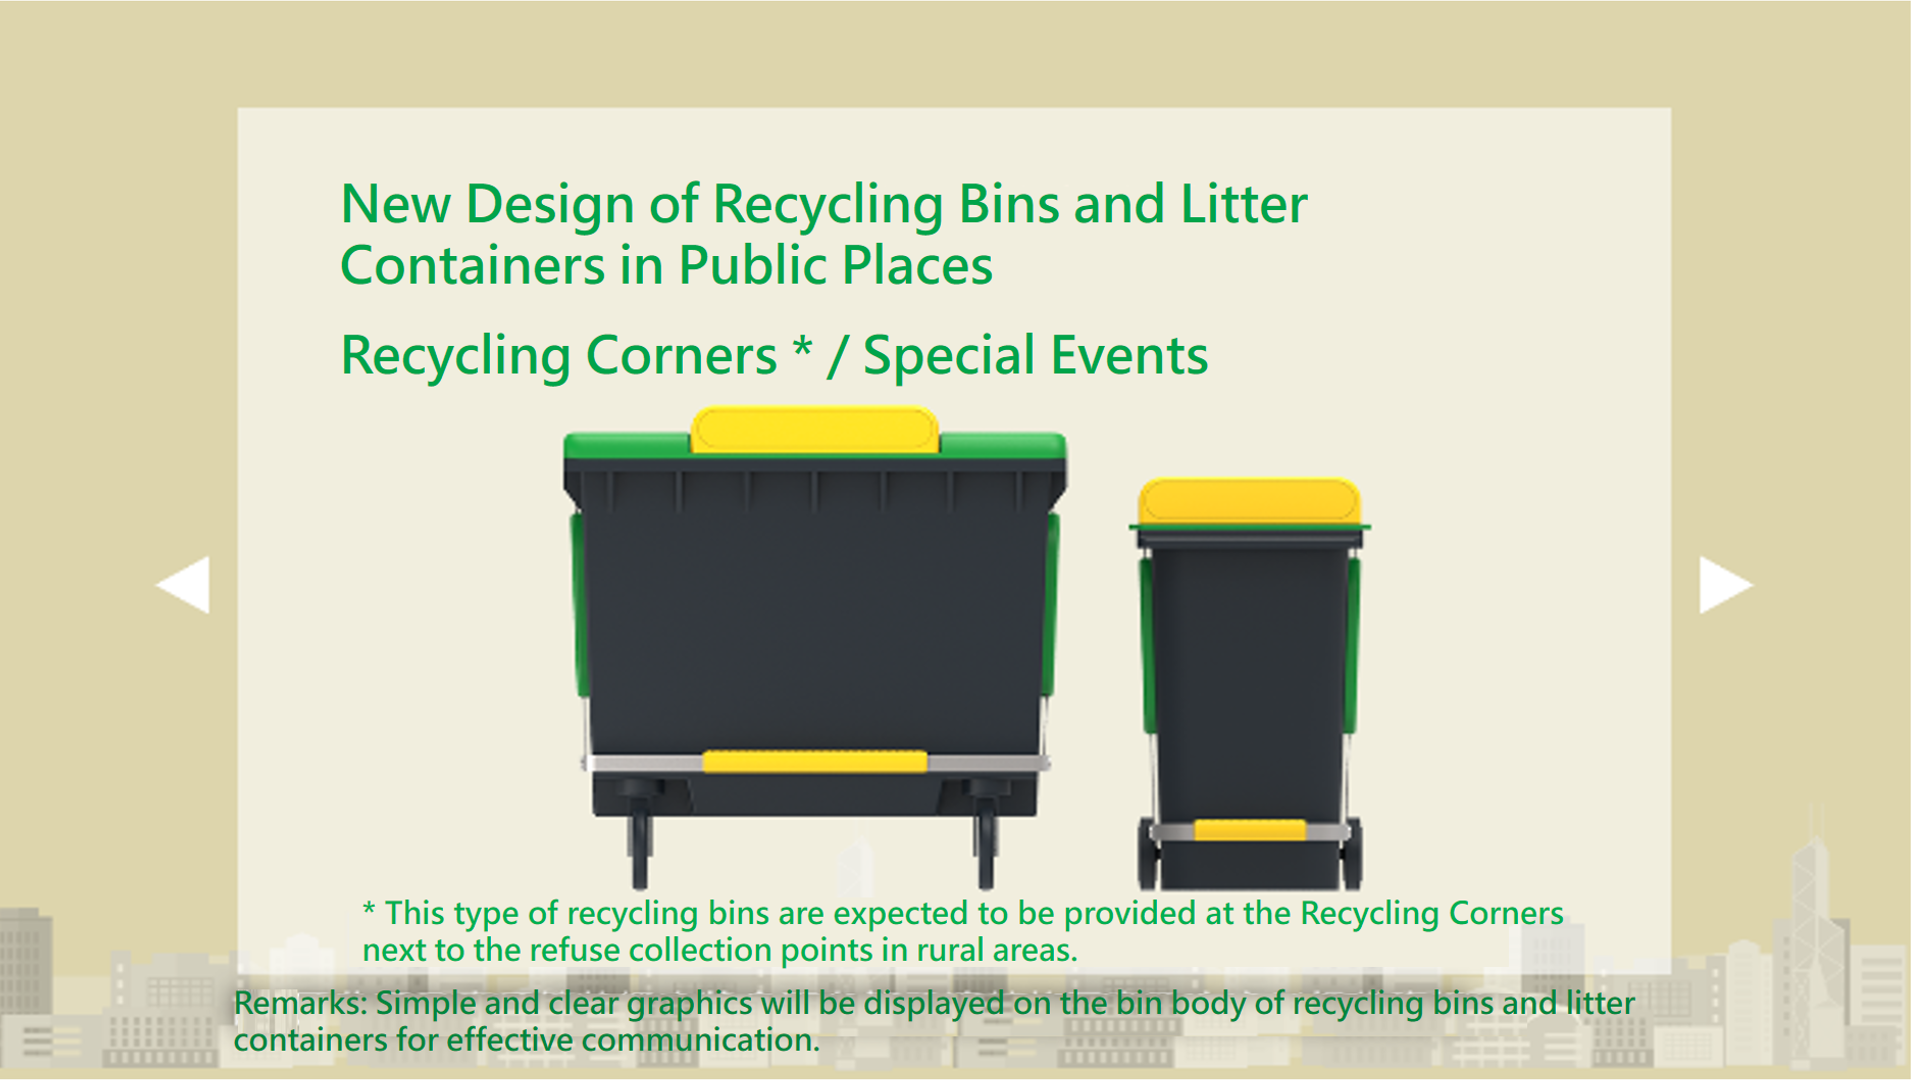 New Design of Recycling Bins and Litter Containers in Public Places - Recycling Corners/Special Events